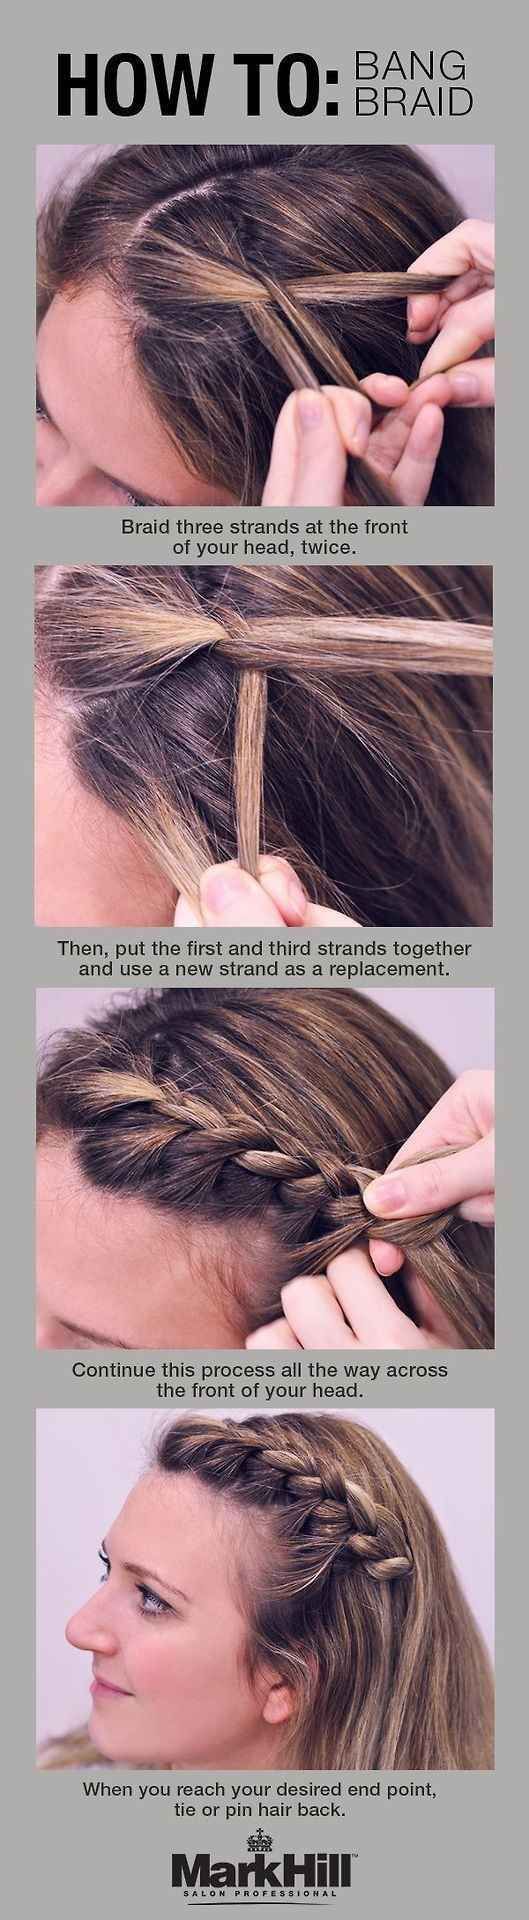 10 Awesome Lists for Hair Care Tips